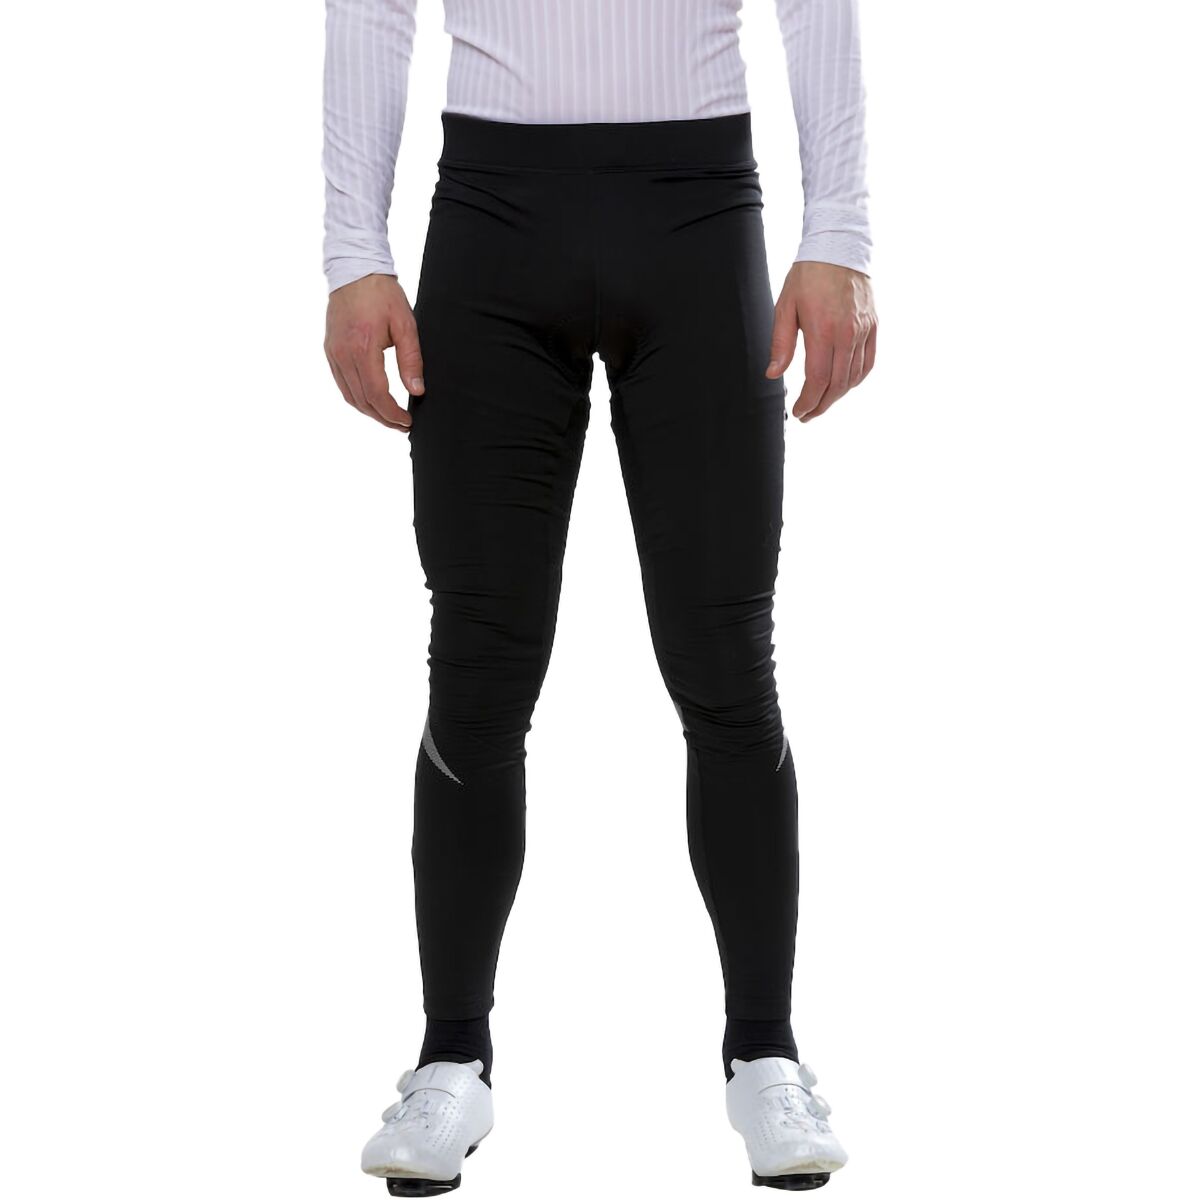 Craft Ideal Thermal Tight - Men's